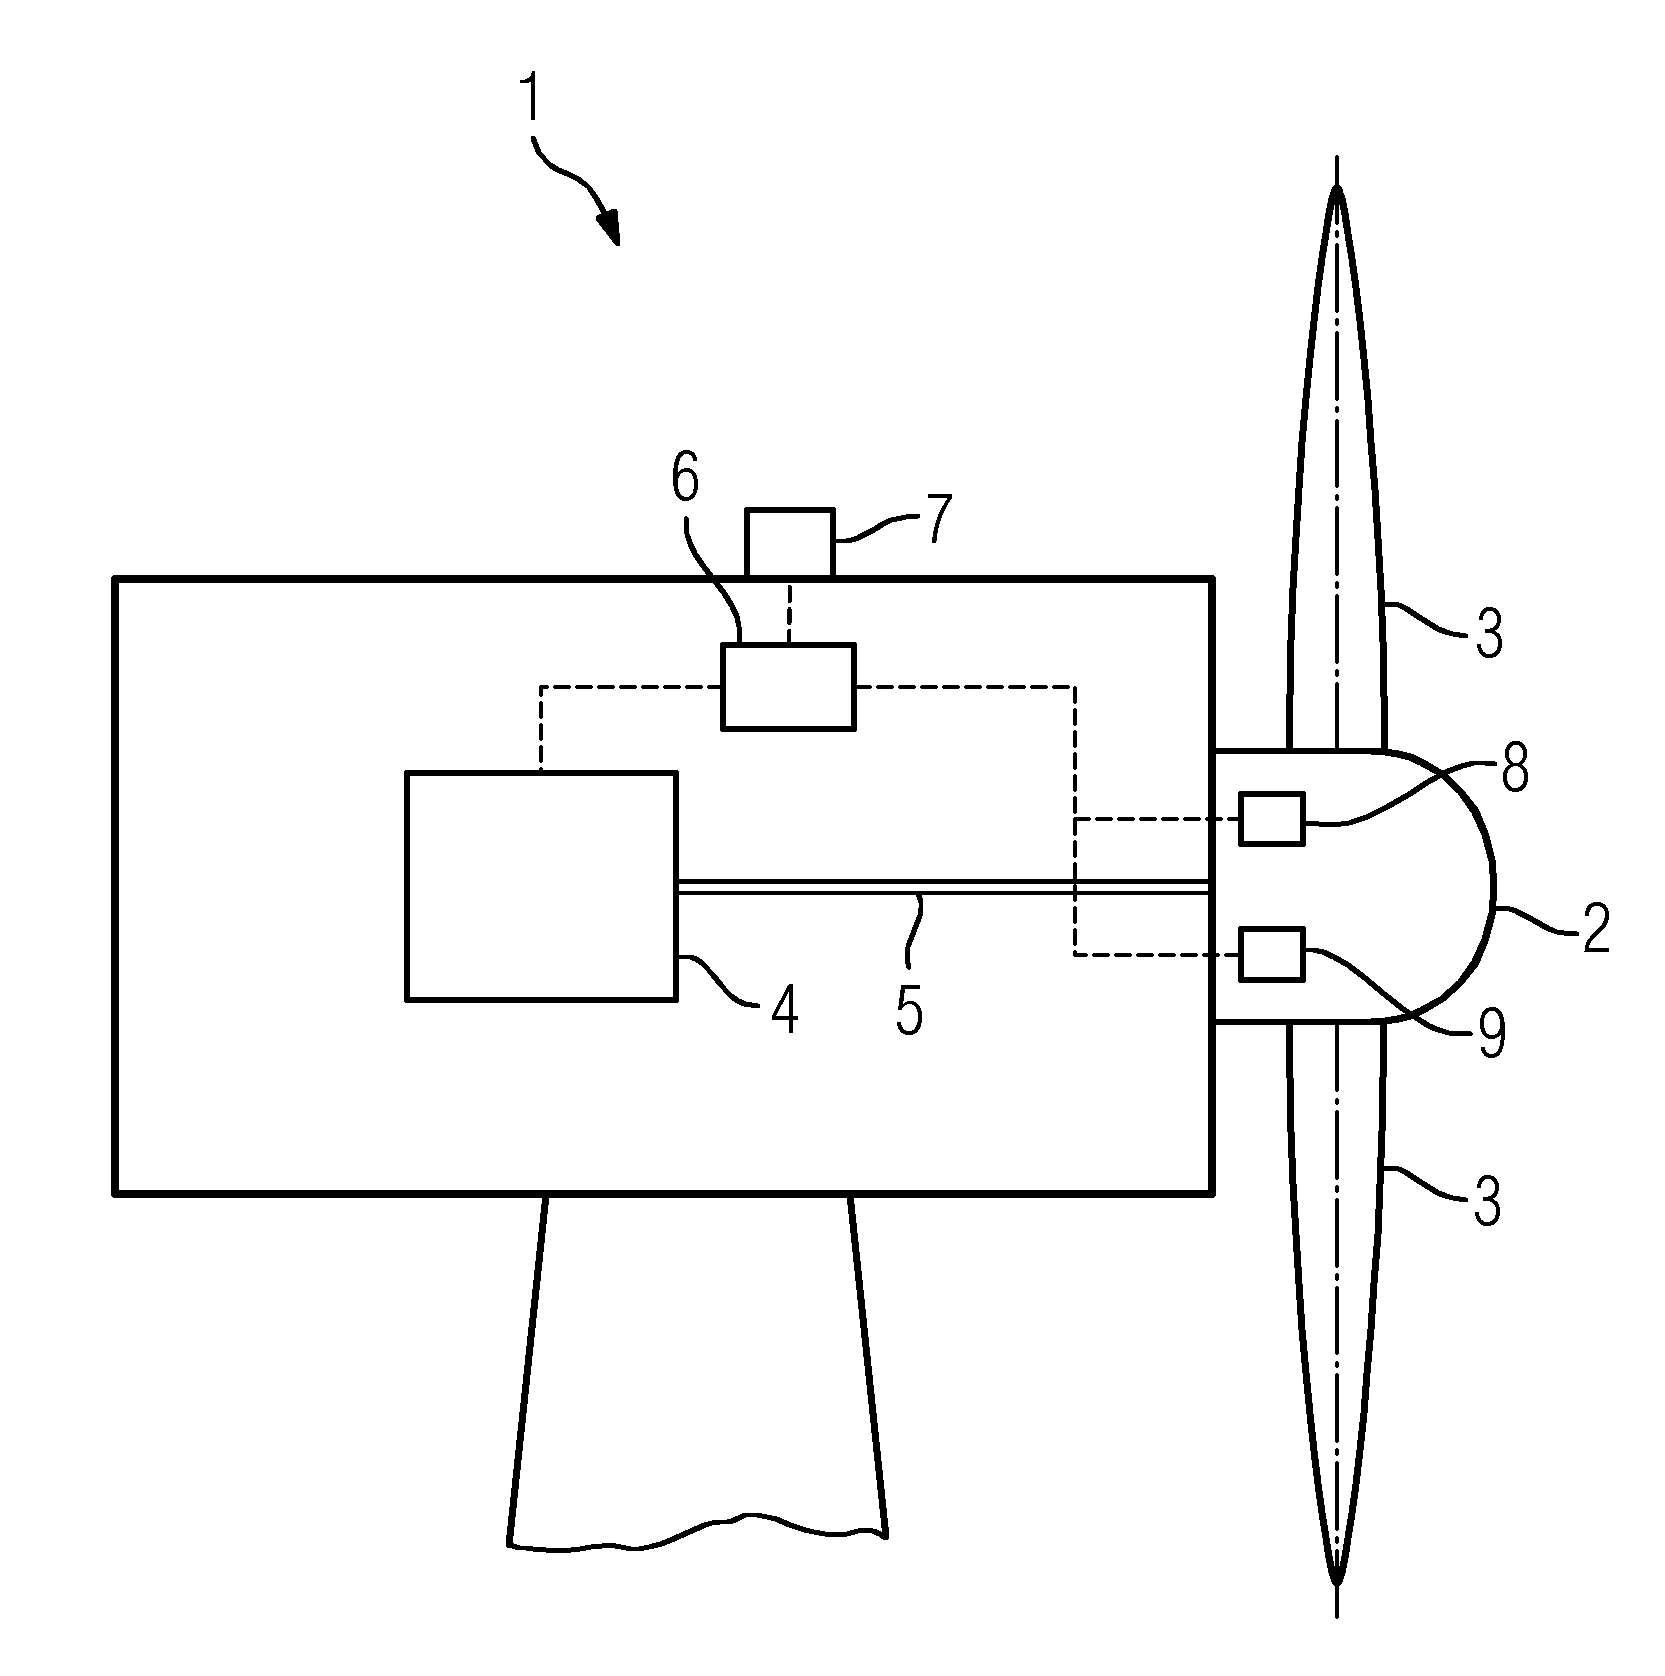 Method for operating a wind turbine having a rotor hub supporting at least one rotor blade